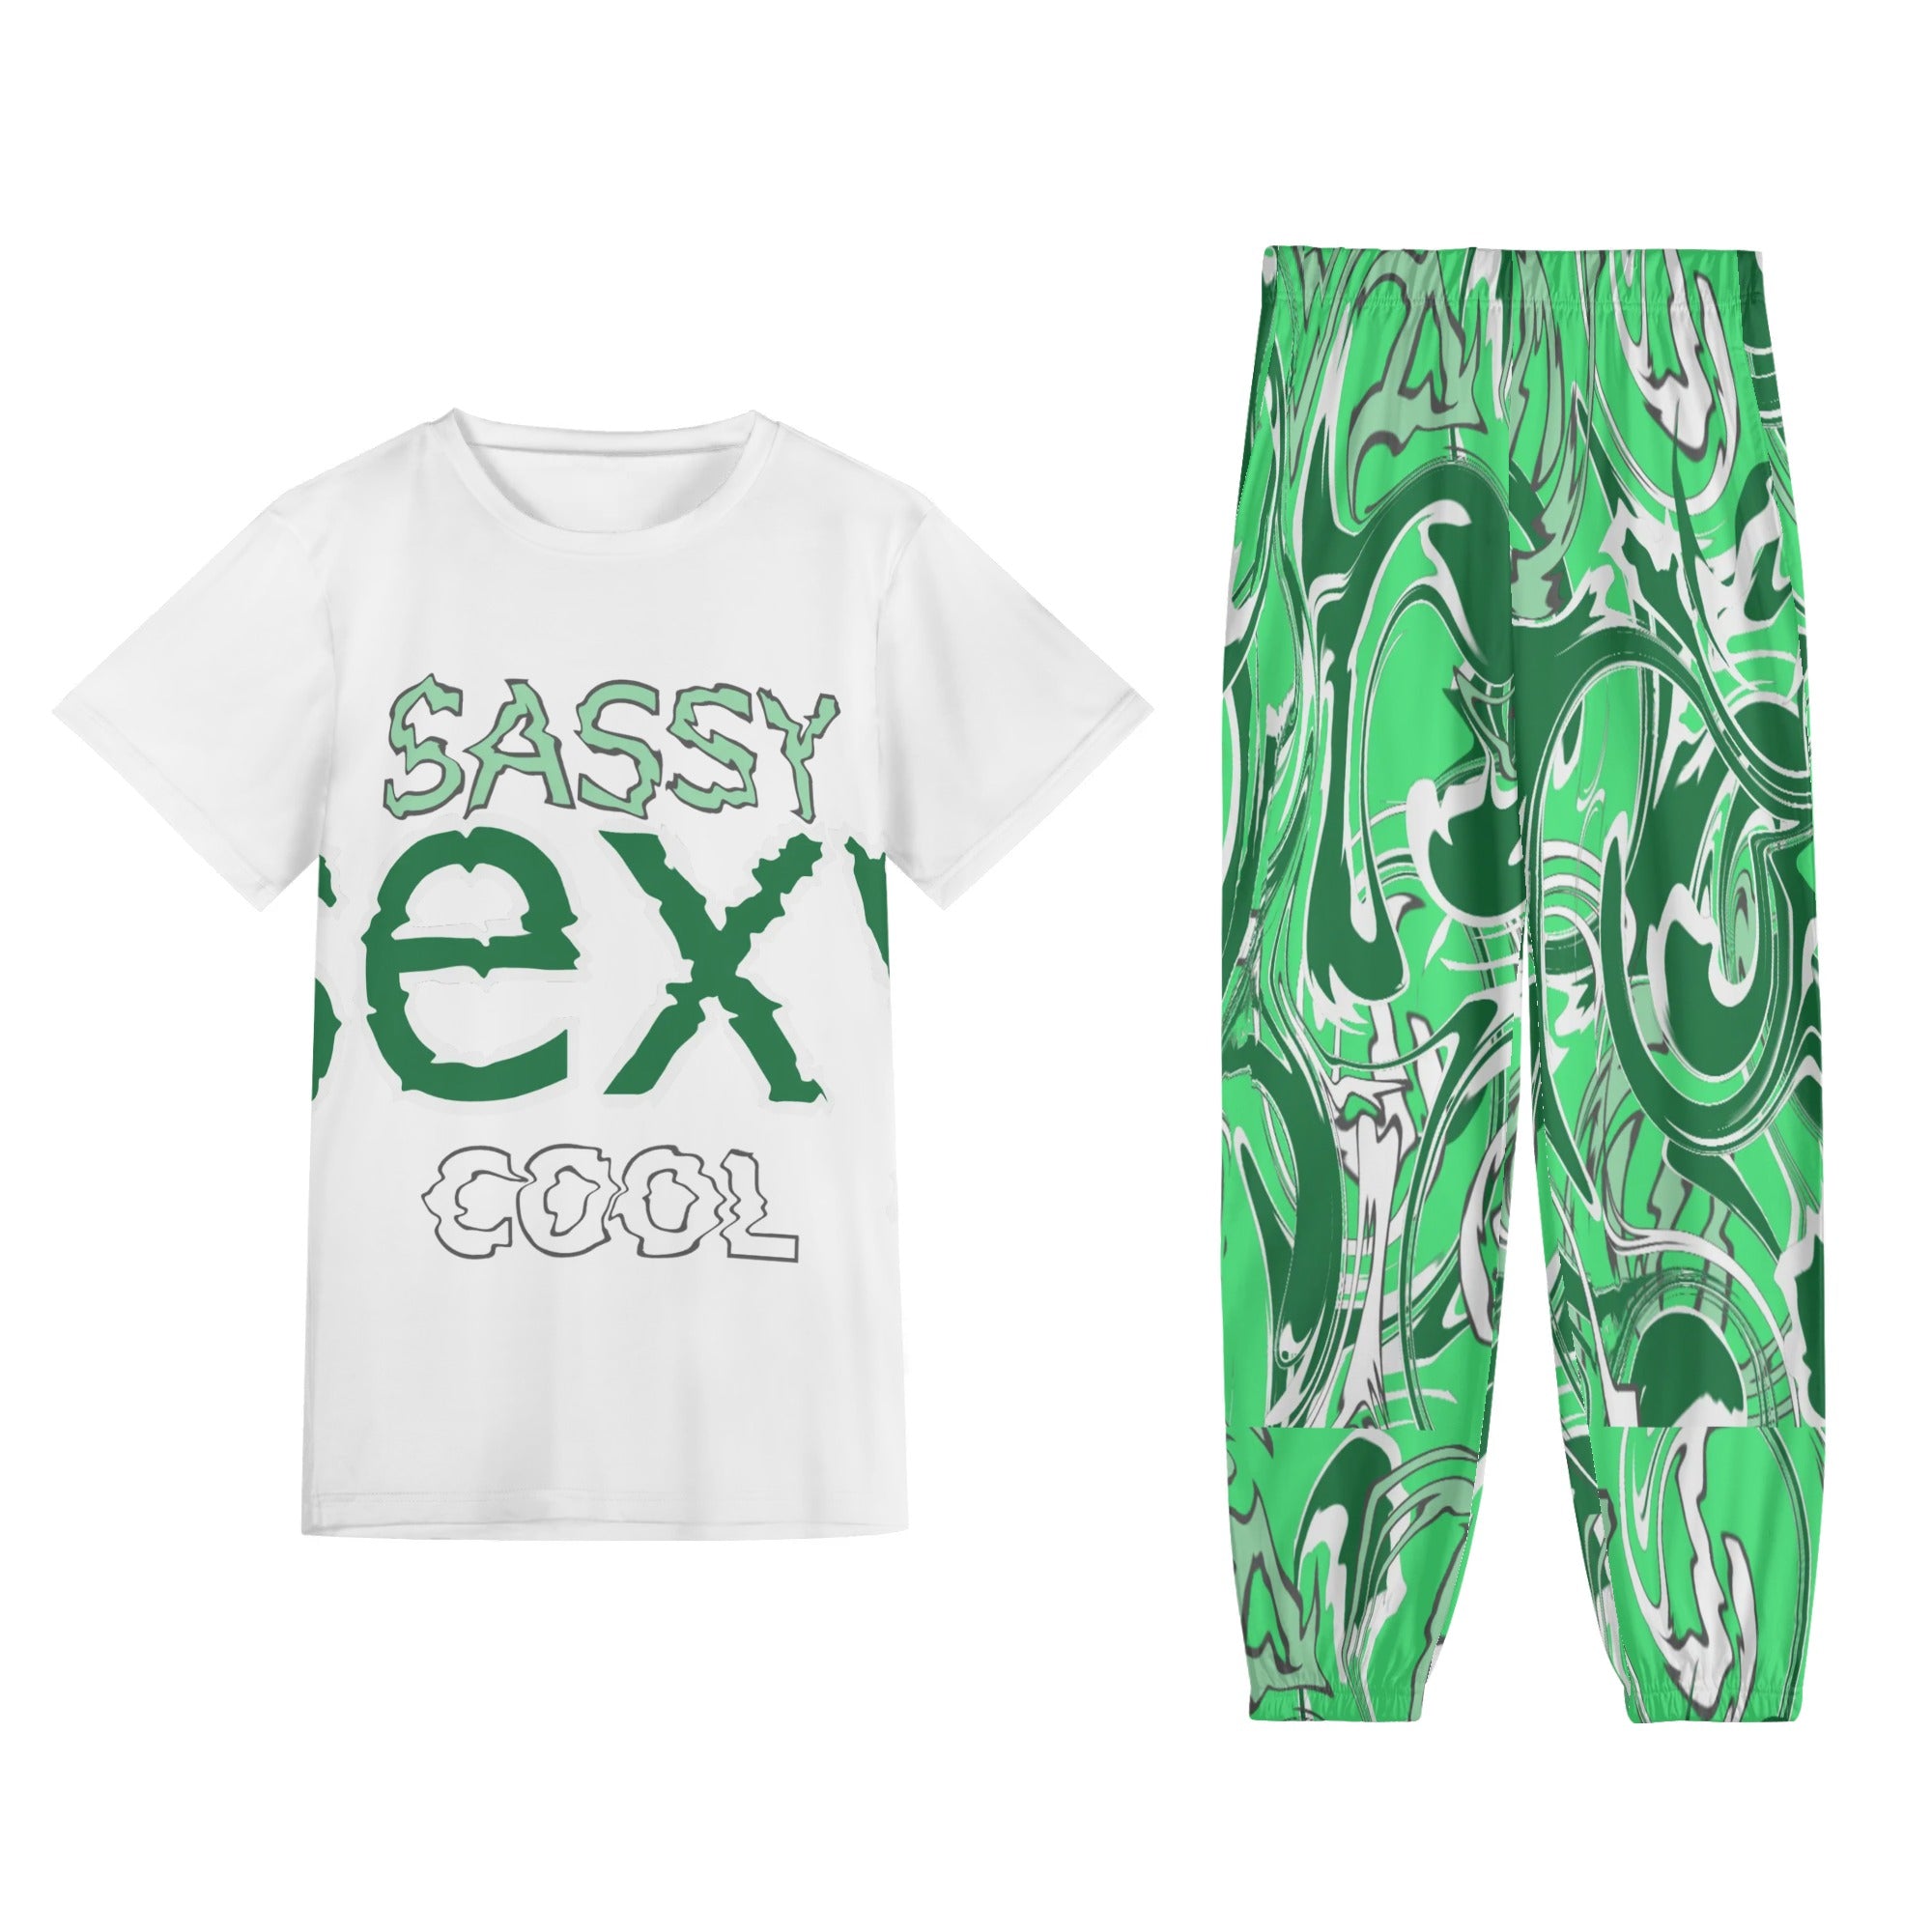 Sassy Sexy Cool Womens Short Sleeve Sports Outfit Set